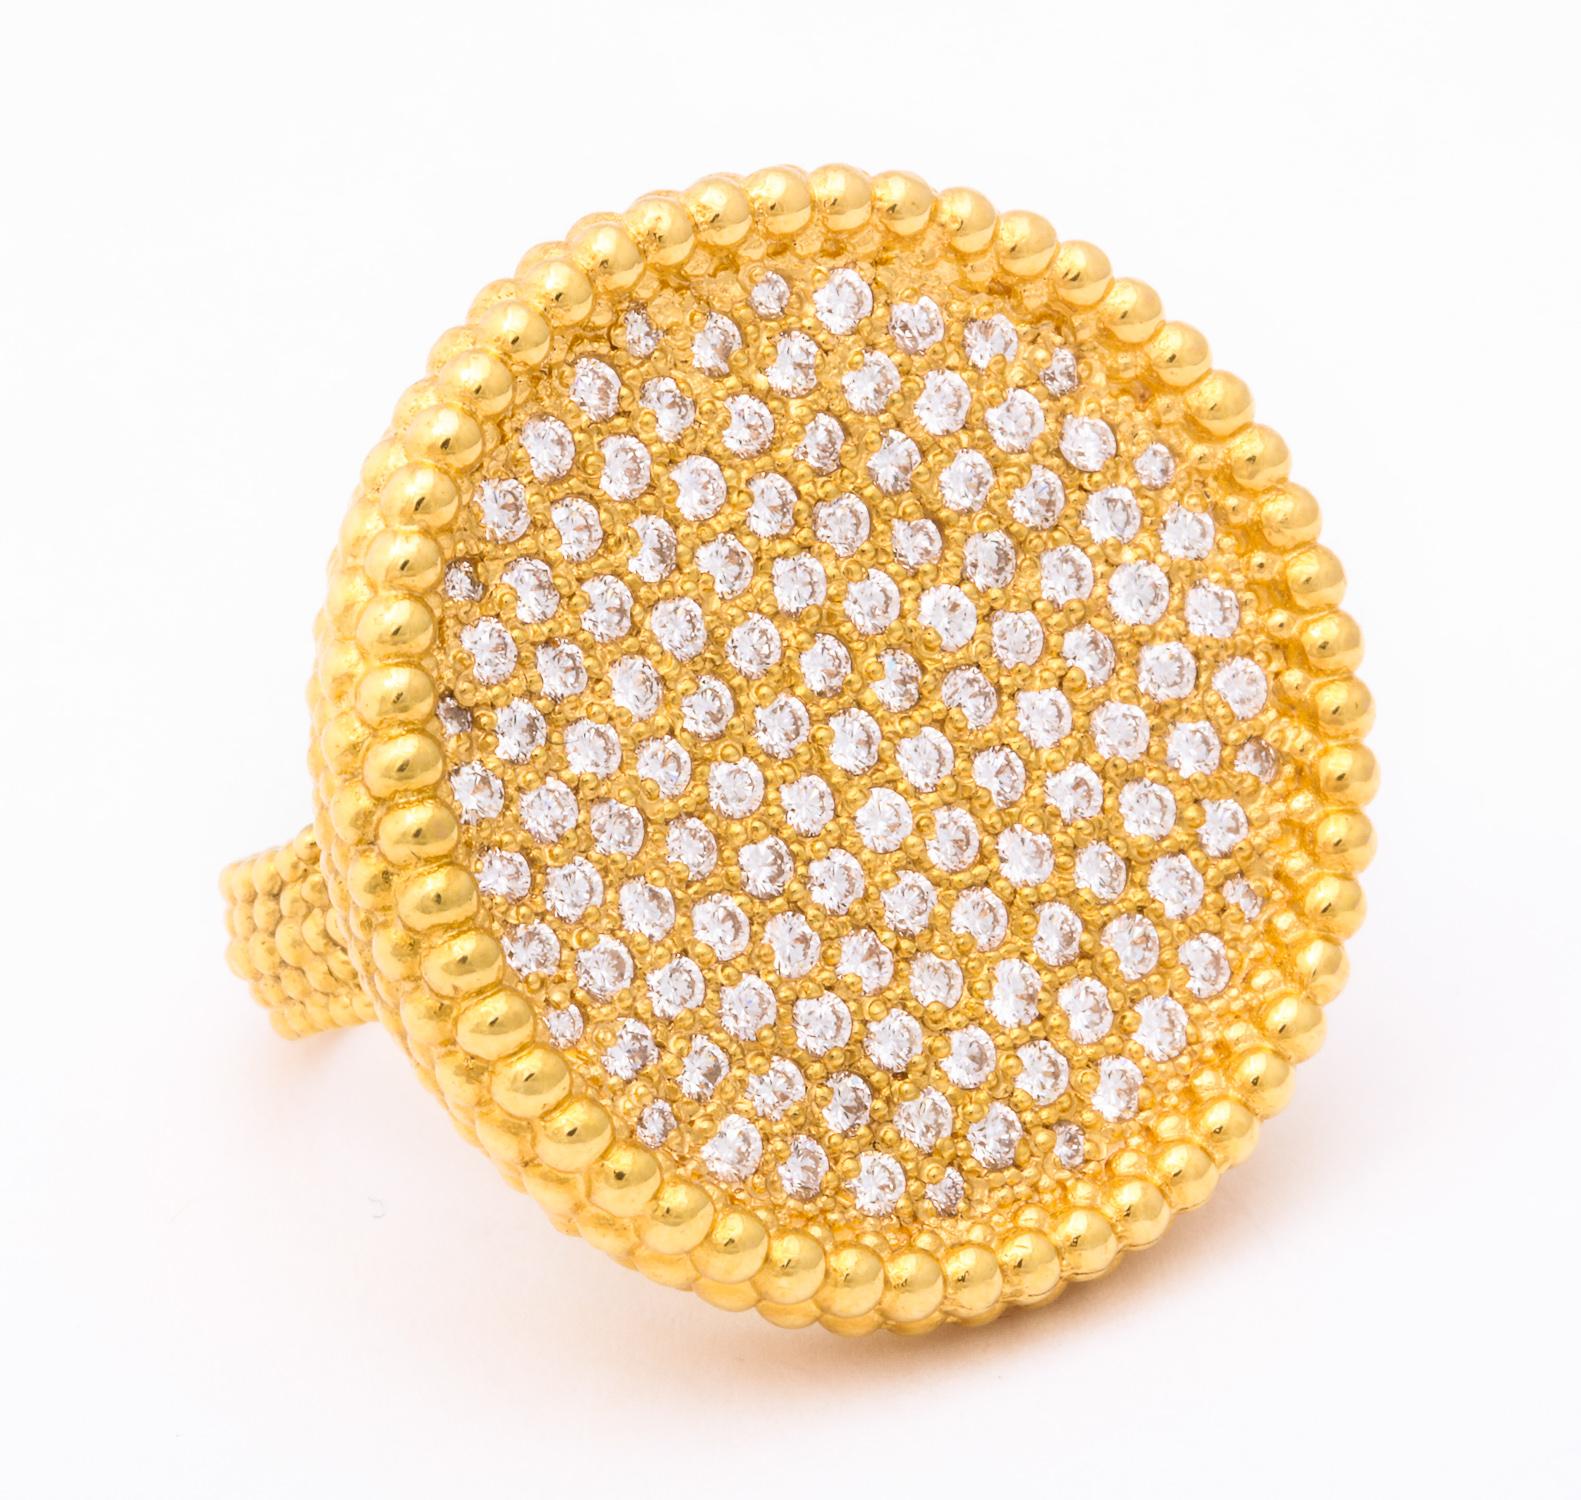 One Large Fun Textured Gold Cocktail Ring Designed By Carla Amorim A Brazilian Based Designer Composed Of Numerous Full Cut Diamonds Weighing Approximately 2 Carats Total Weight, Ring Is Currently Size 7.5 And May Be Resized. Made In Brazil In The